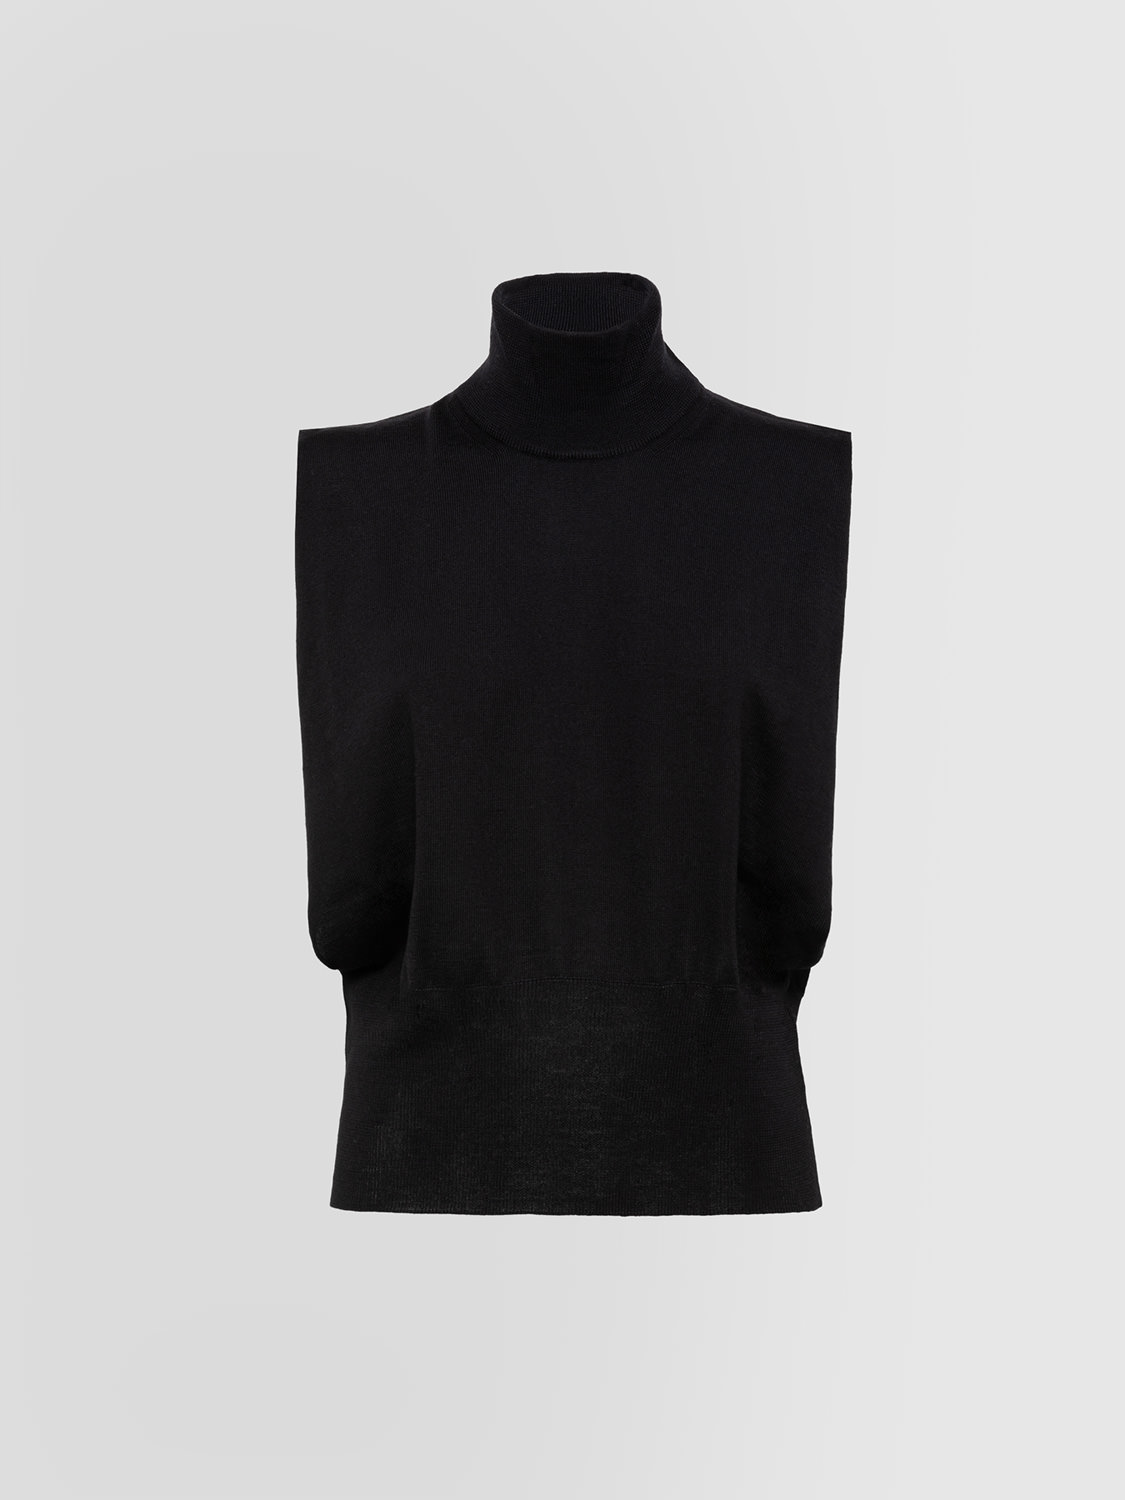 ALPHA STUDIO: DIFFERENT SHAPES HIGH NECK SWEATER